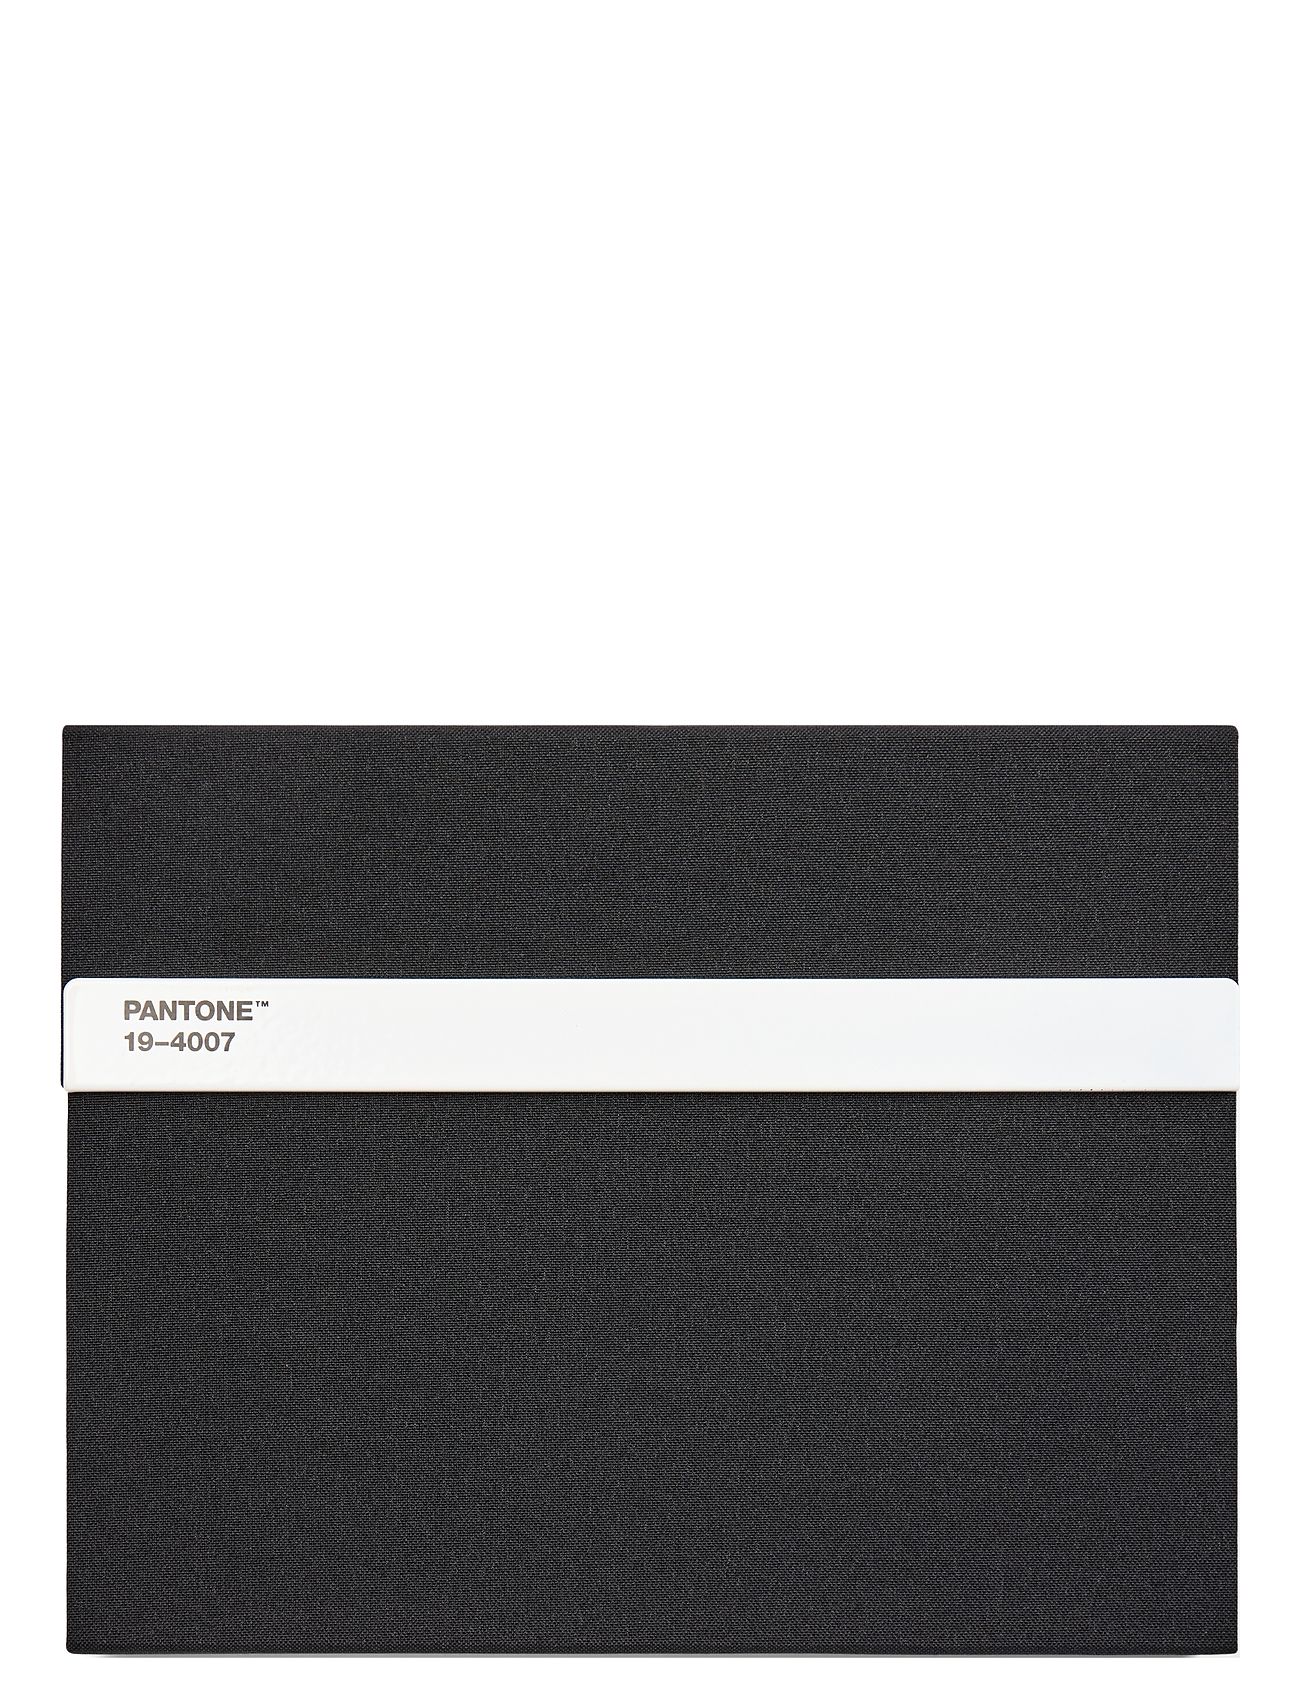 Pant New Notebook With Pencil. / Lined Home Decoration Office Material Calendars & Notebooks Black PANT